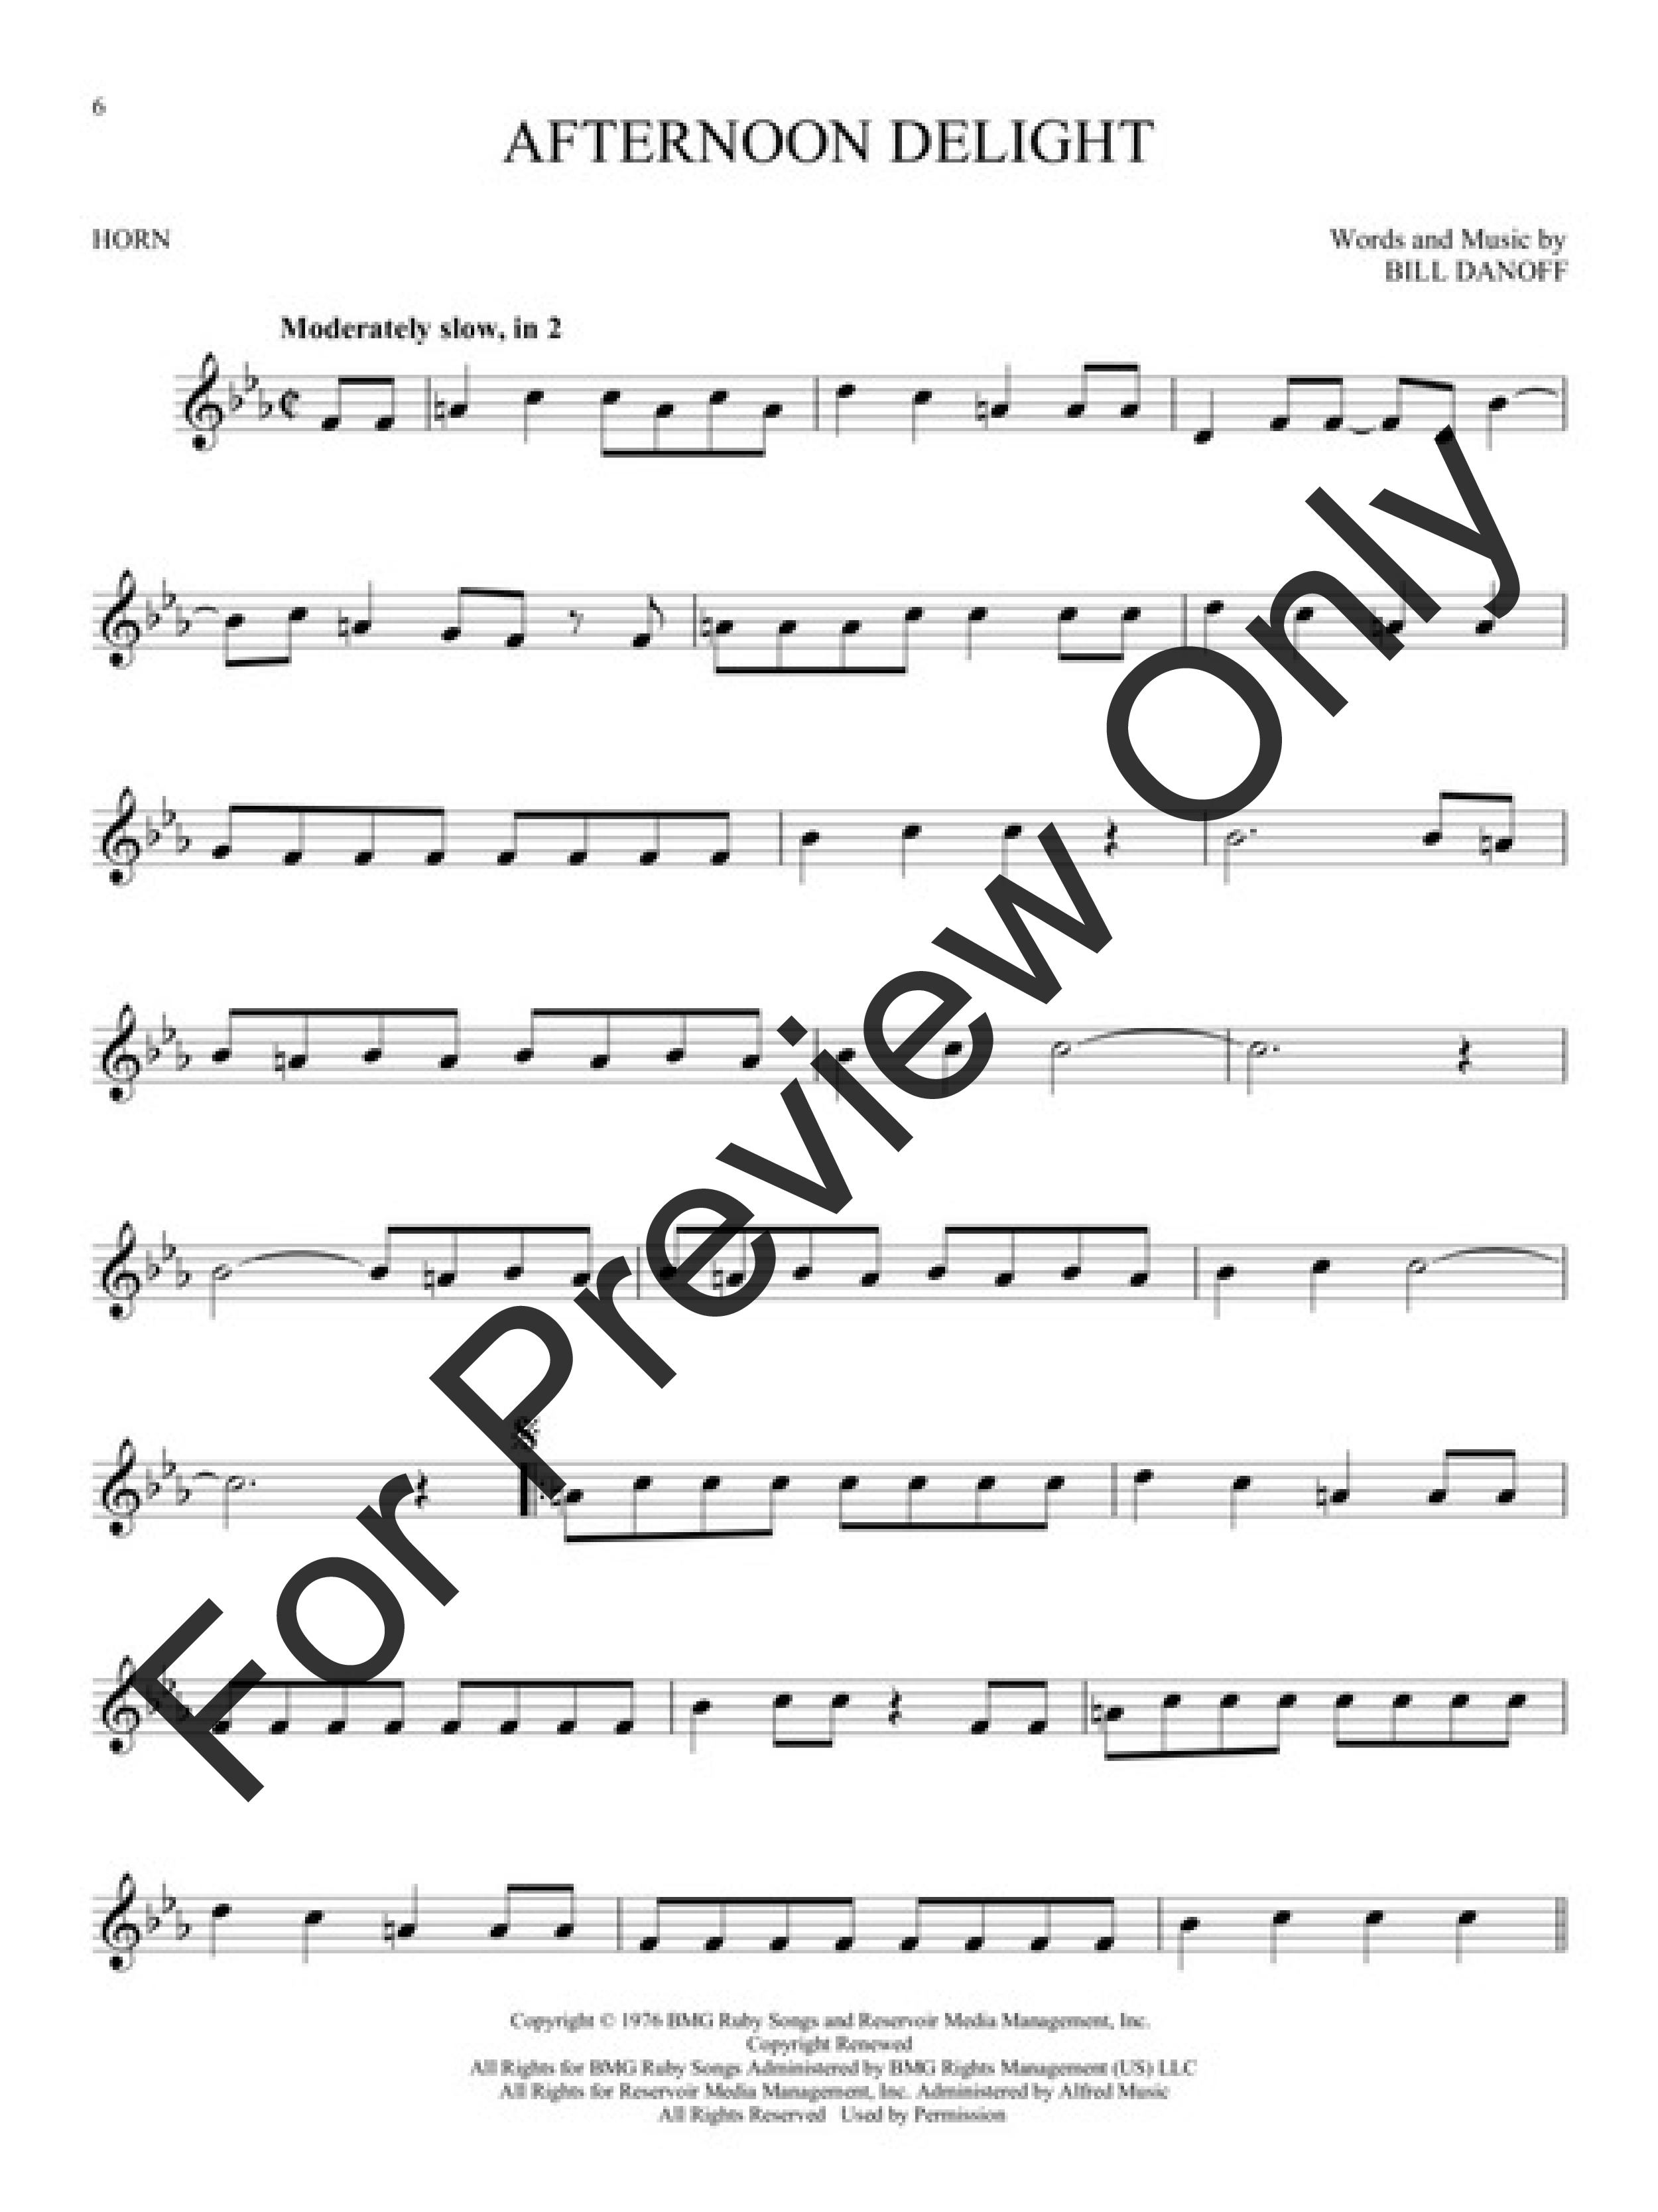 101 Popular Songs French Horn Book